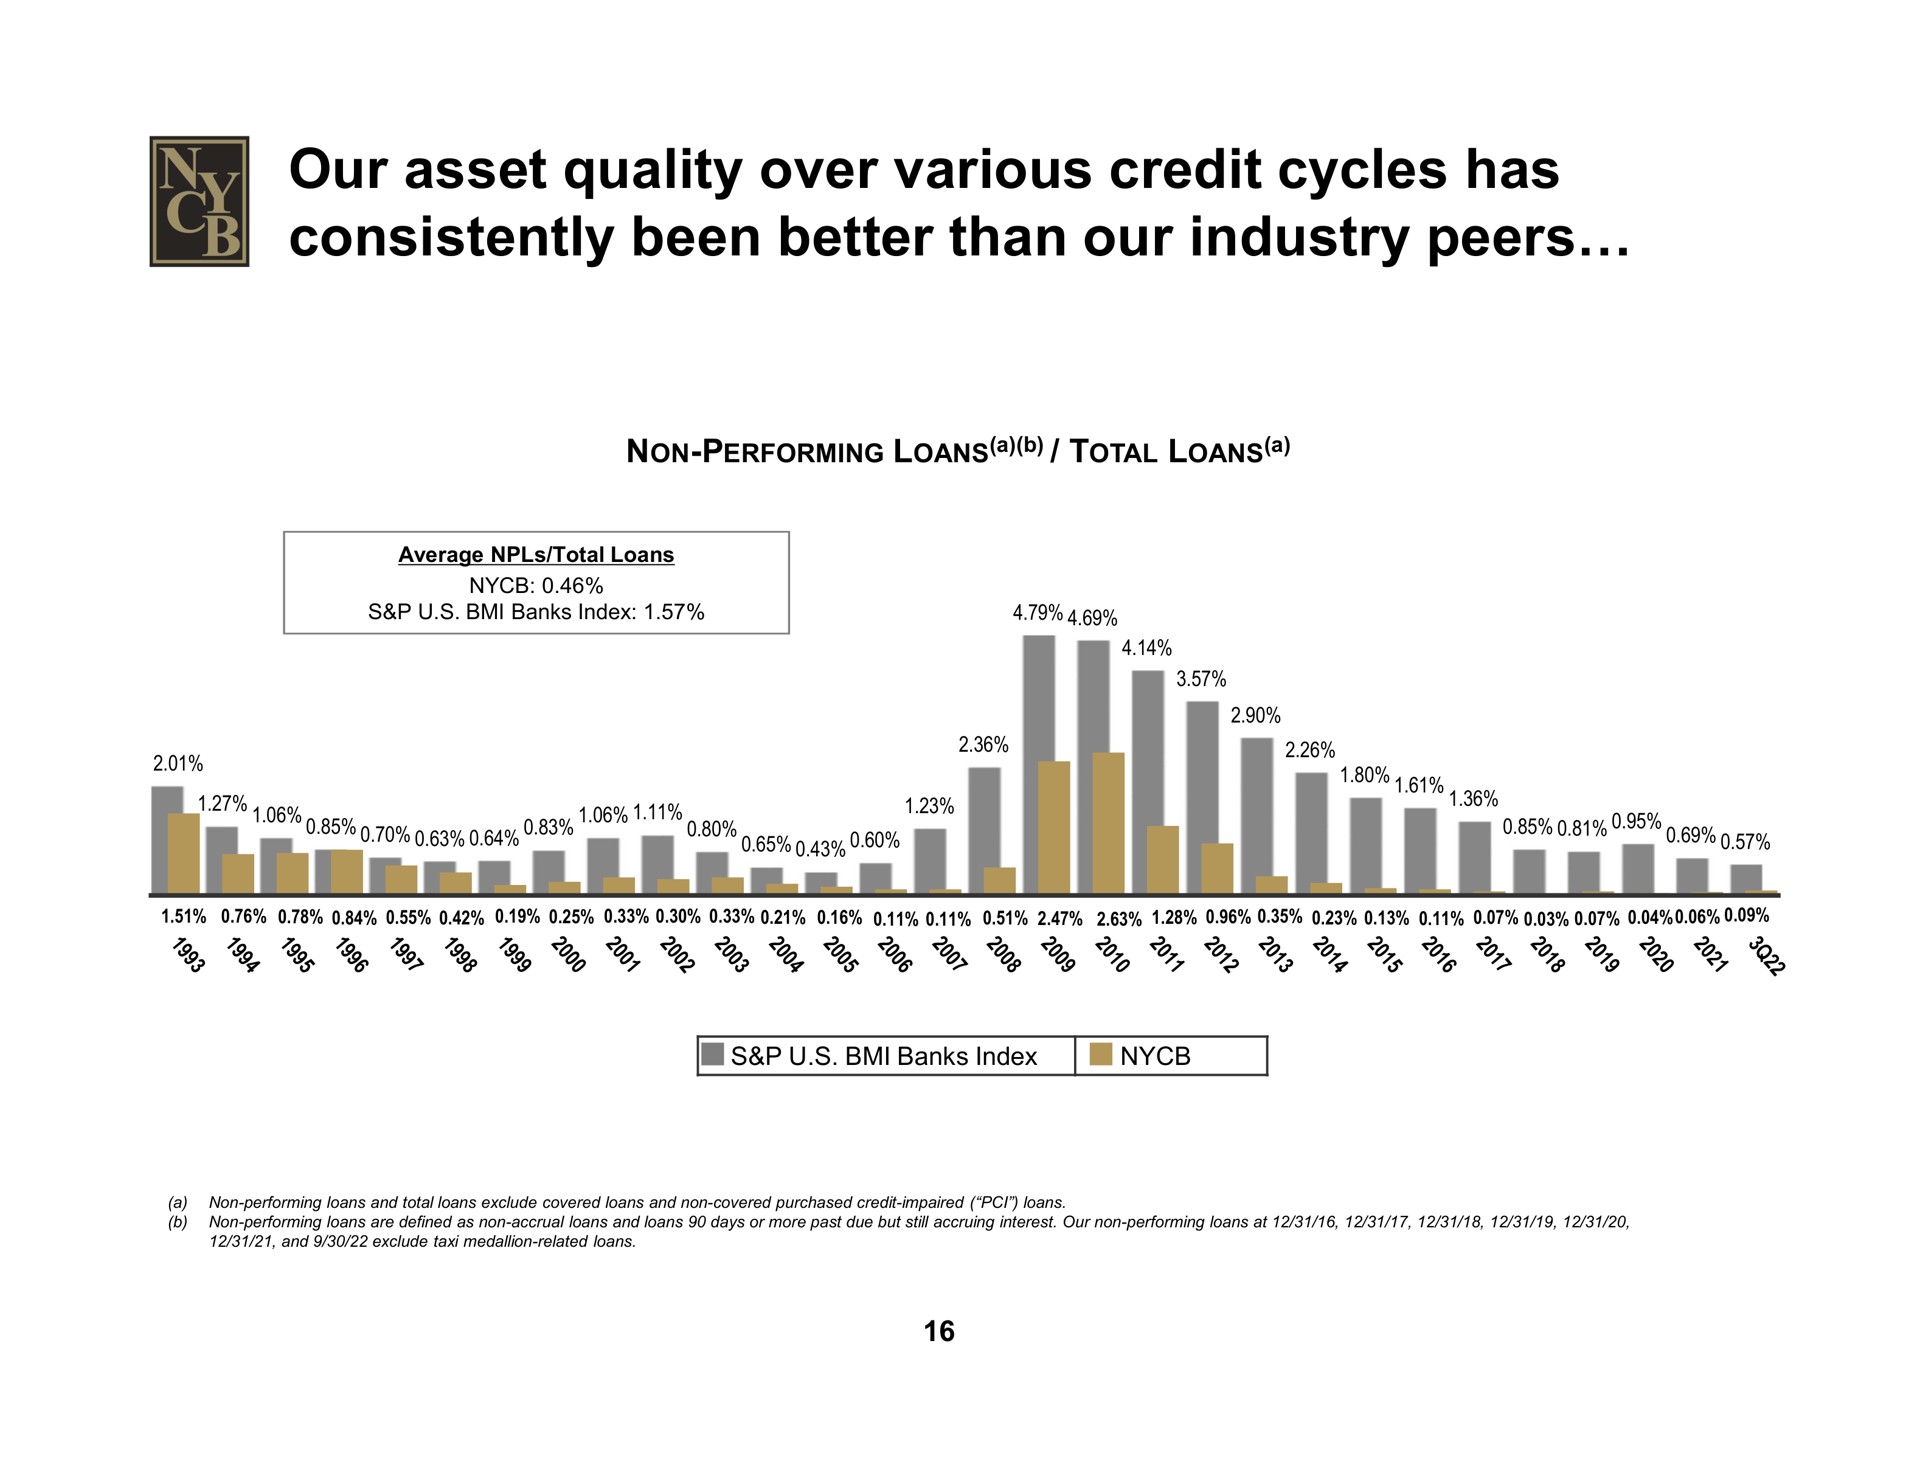 our asset quality over various credit cycles has consistently been better than our industry peers | New York Community Bancorp